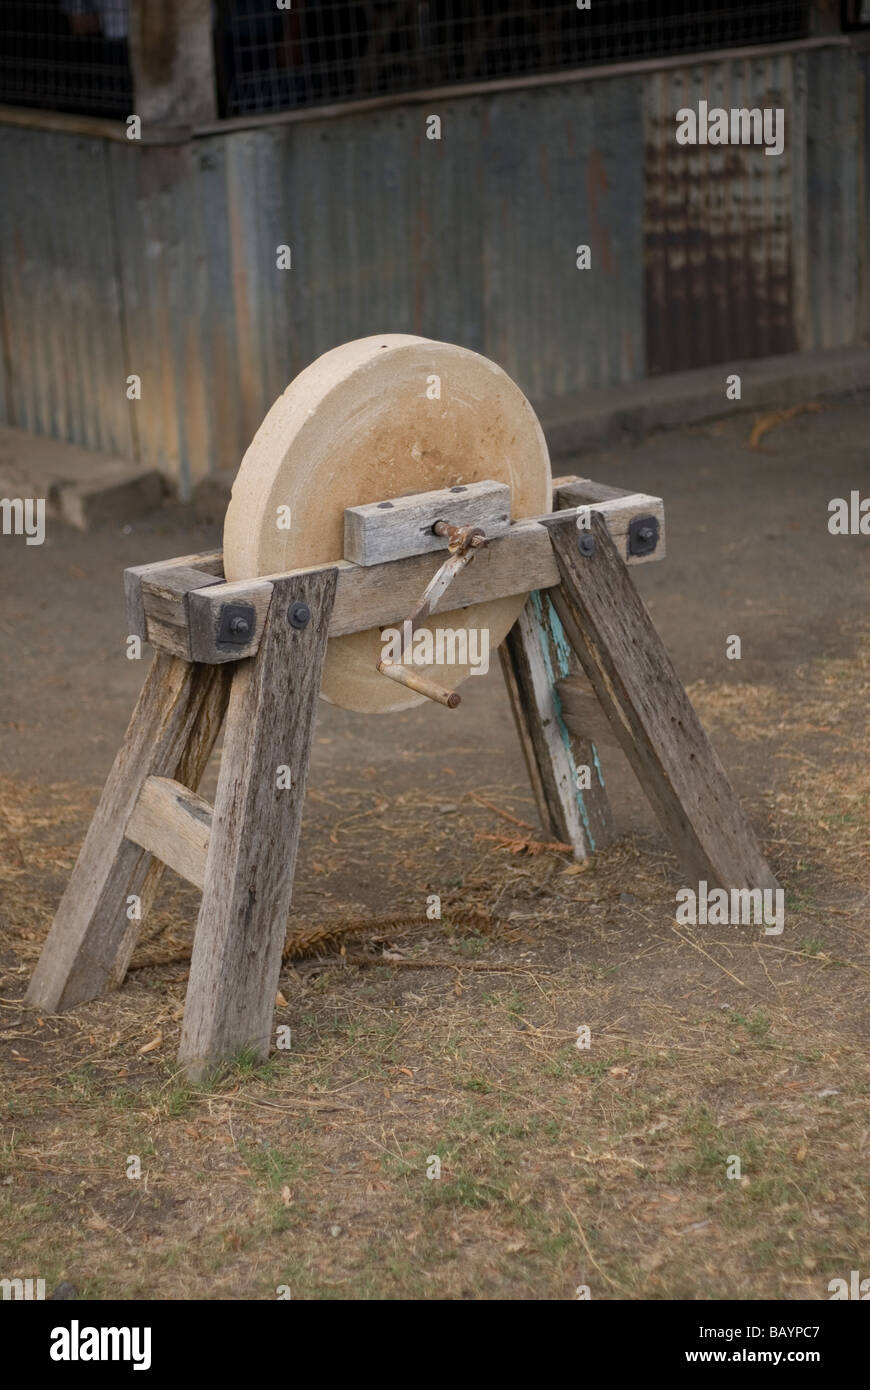 Pedal Driven Knife Sharpening Wheel Stock Photo - Image of instrument,  iron: 183092458